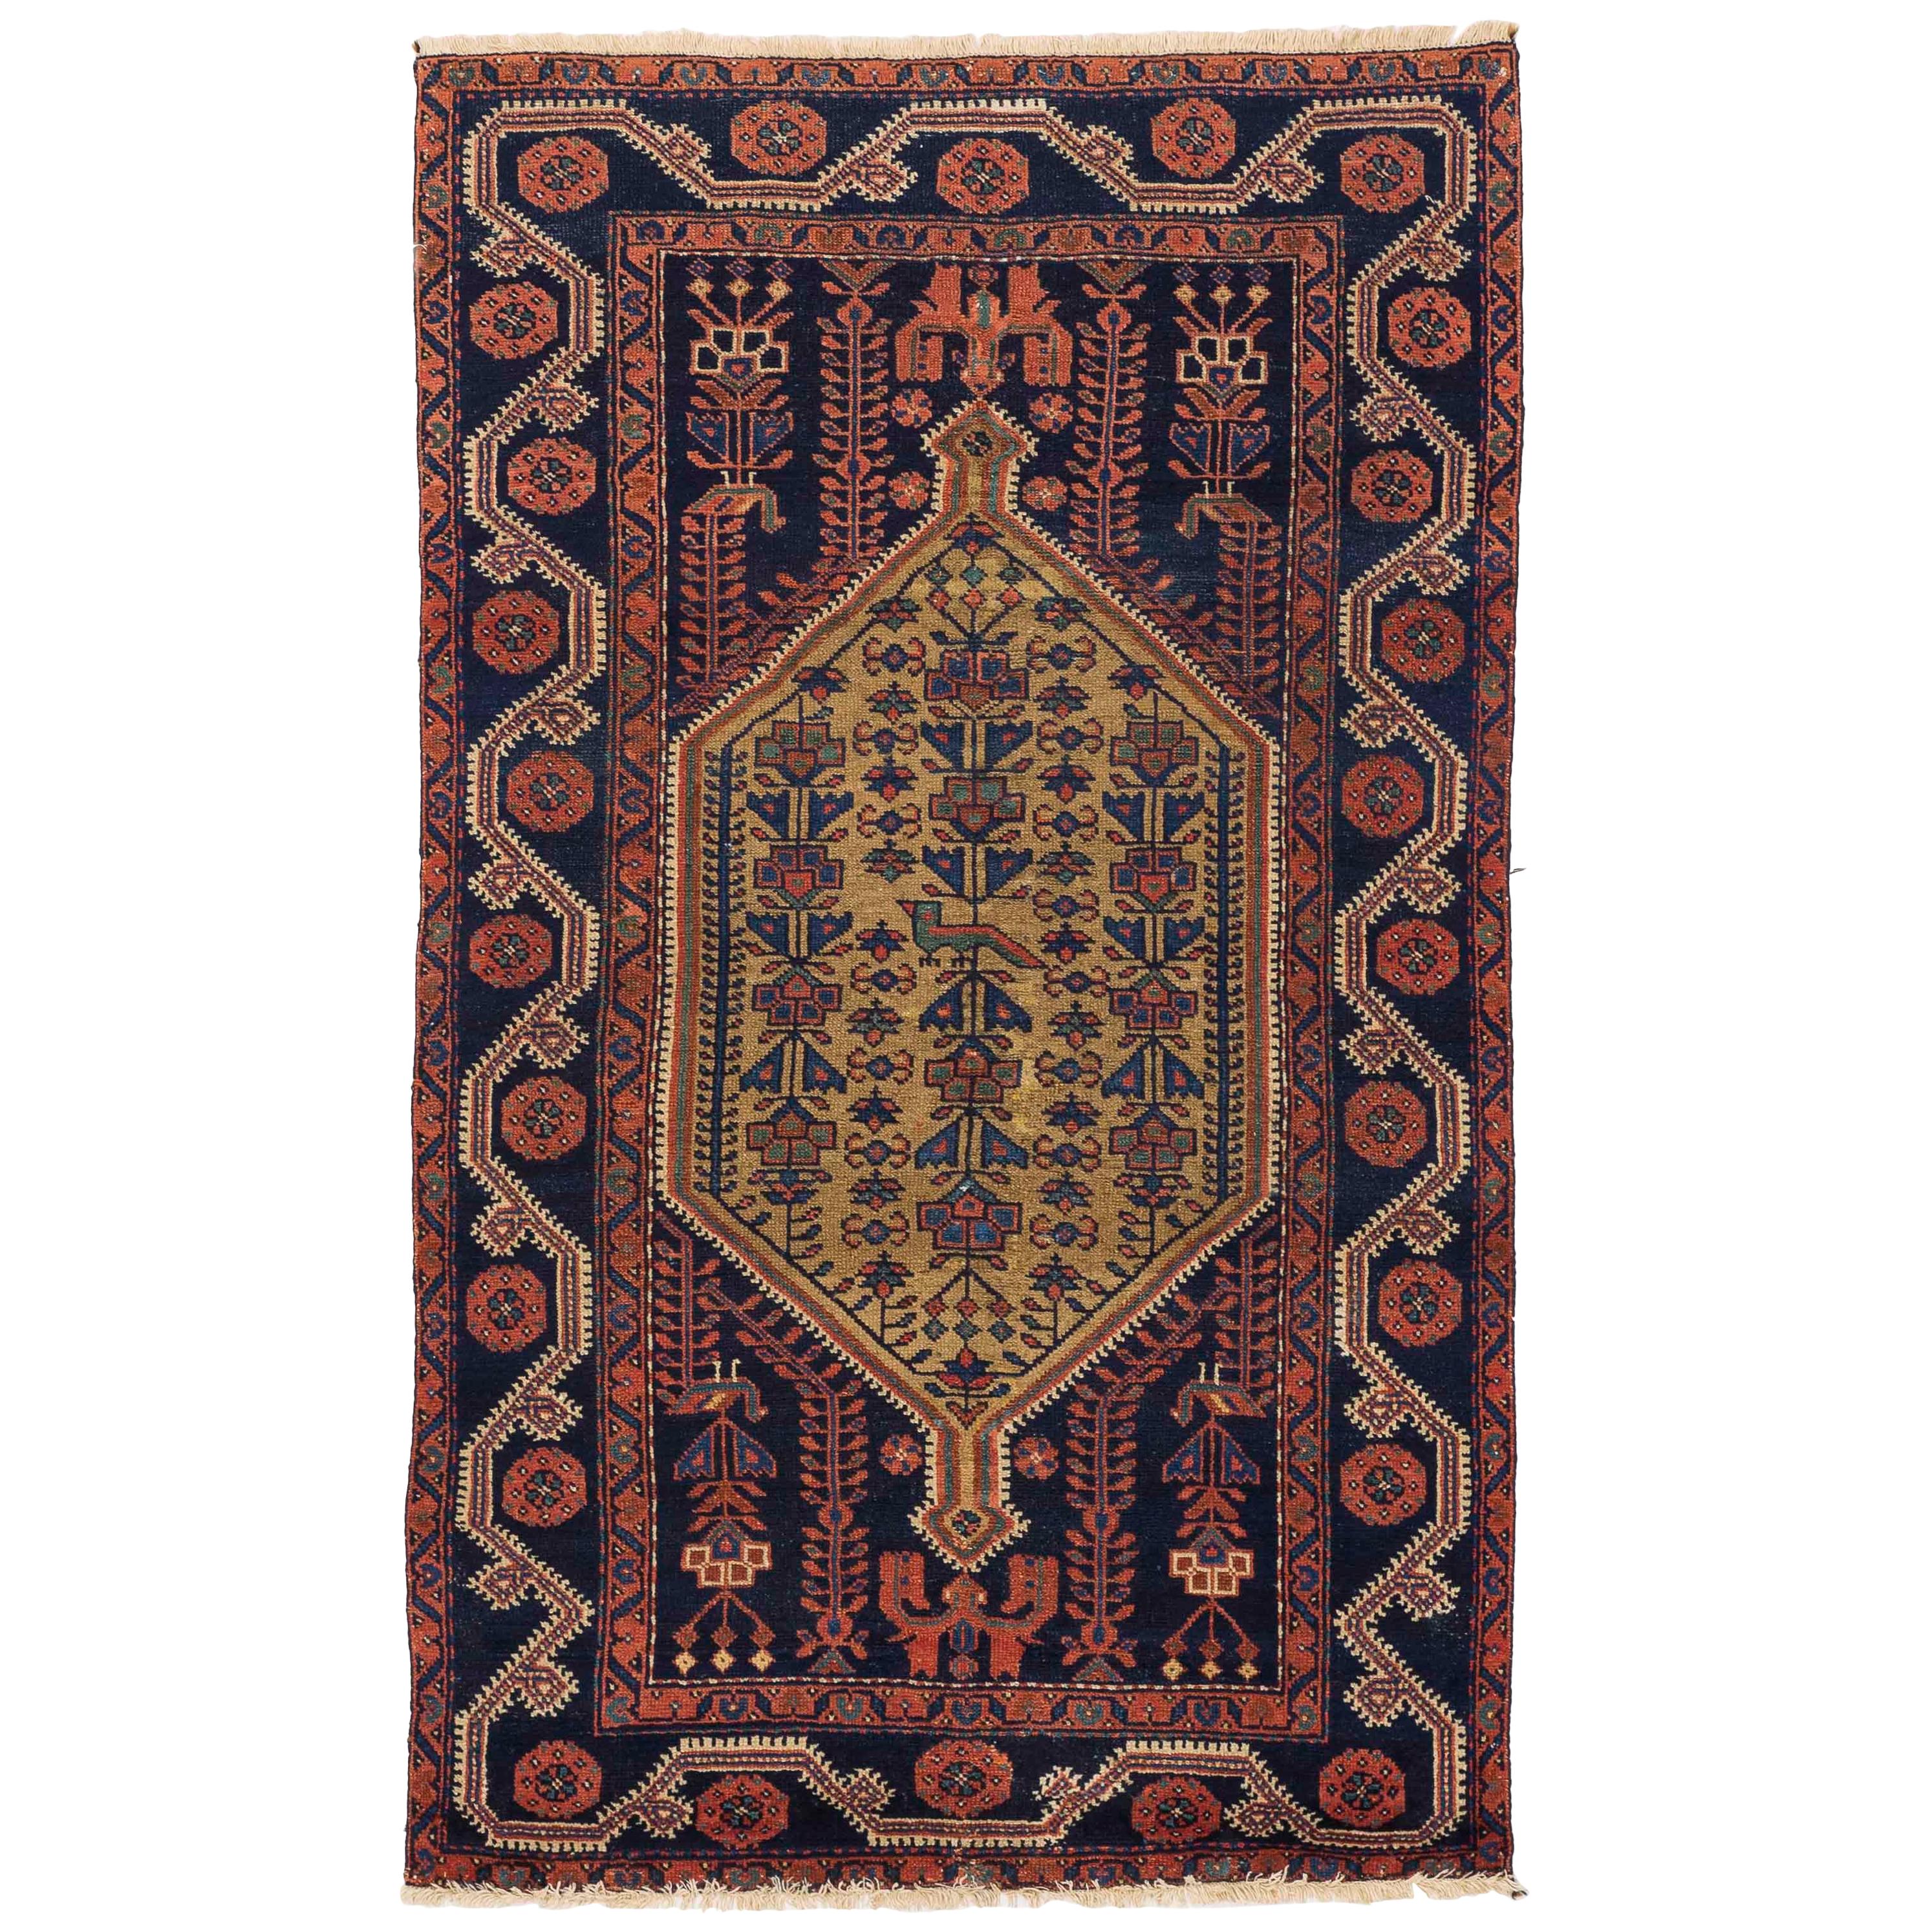 Antique Persian Hamedan Rug with Blue and Red Floral Patterns on Black Field